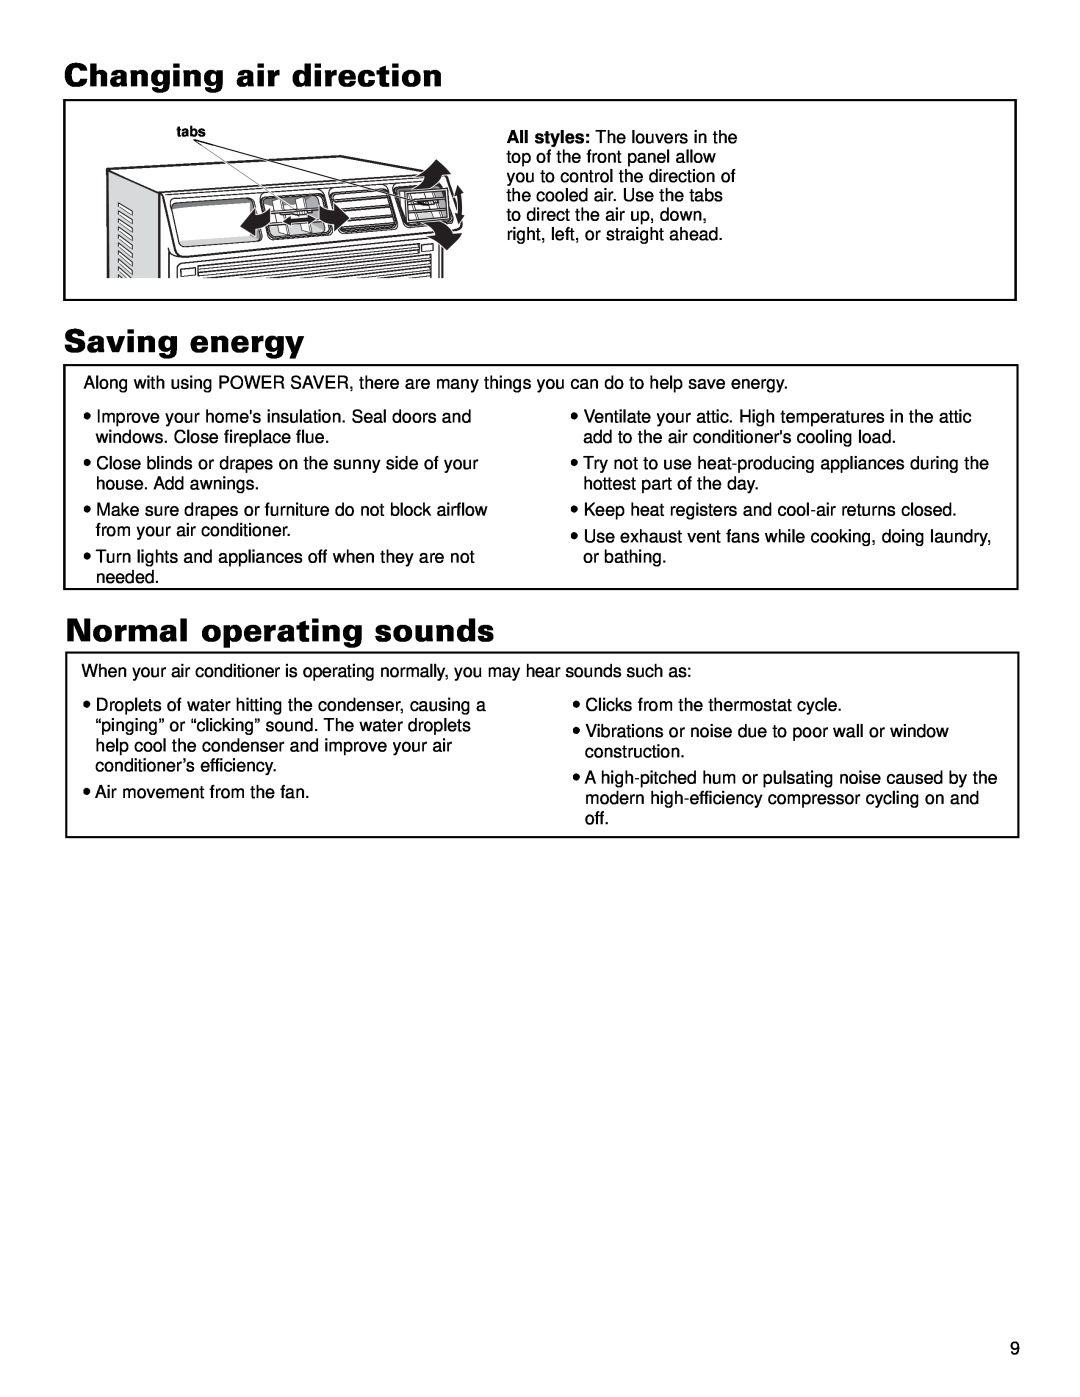 Whirlpool ACE184XL0 manual Changing air direction, Saving energy, Normal operating sounds 